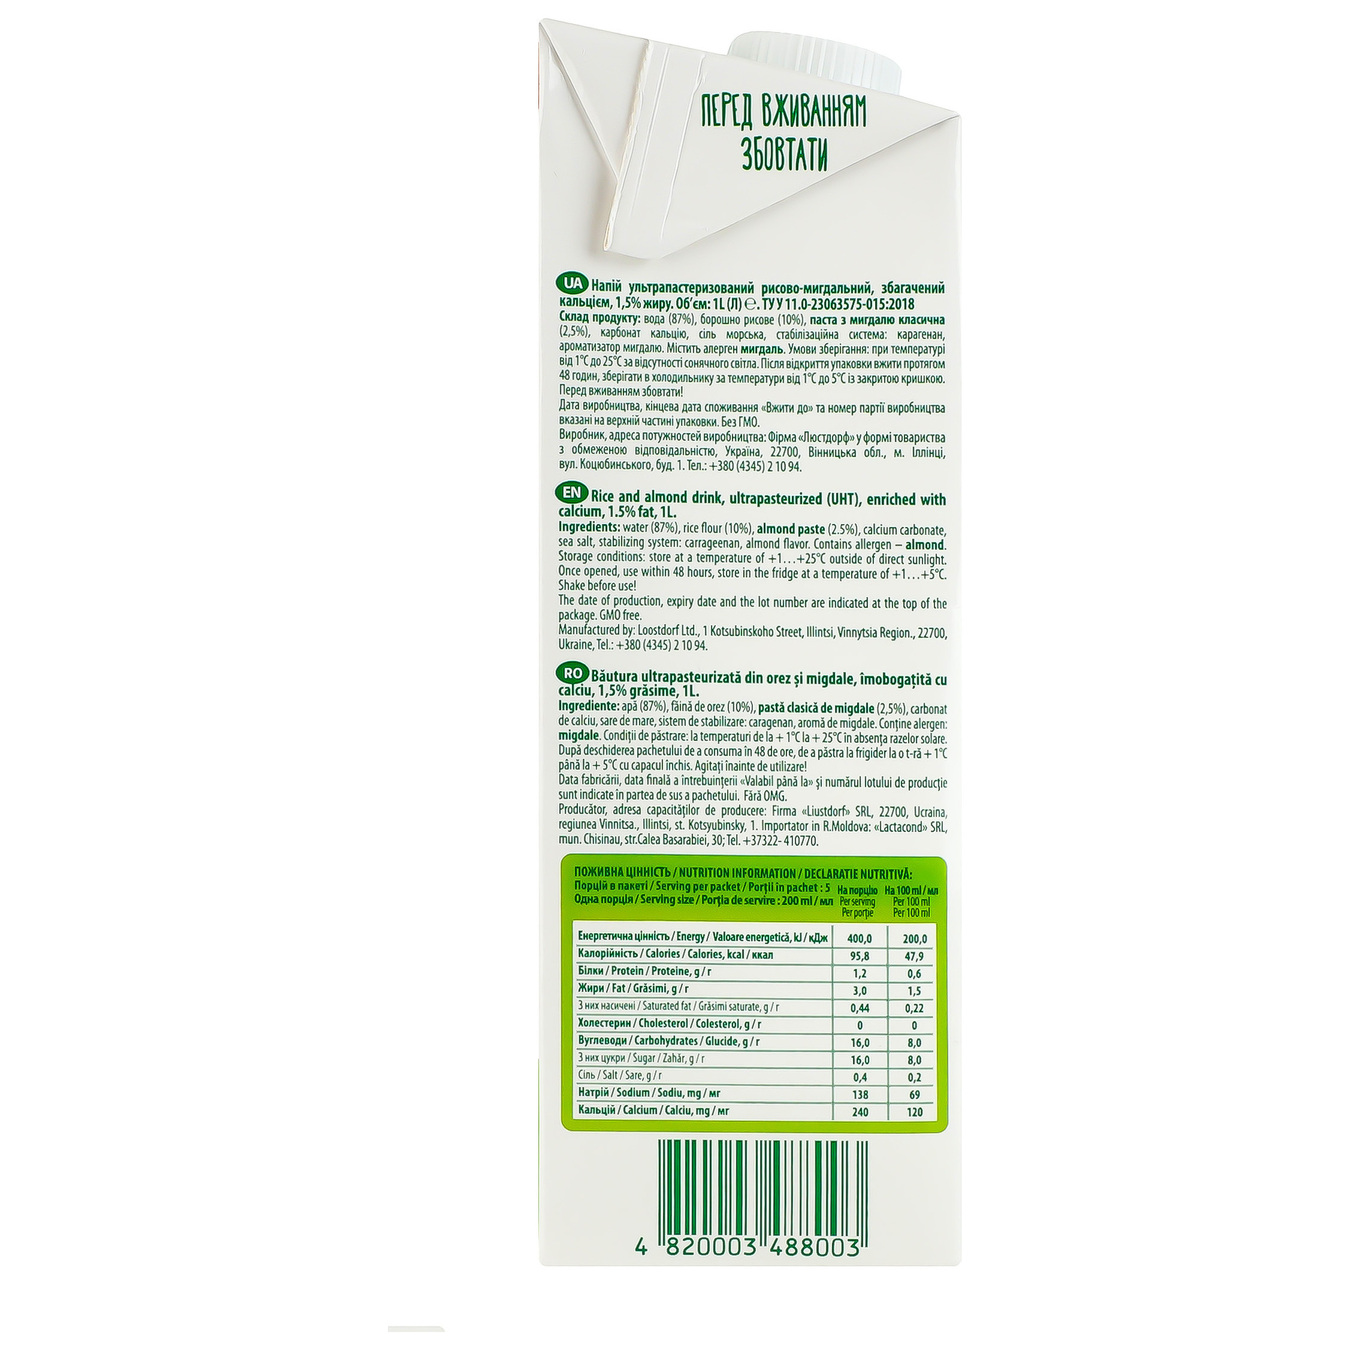 Green Smile Rice-almond drink Almond ultra-pasteurized enriched with calcium 1.5% 1l 5